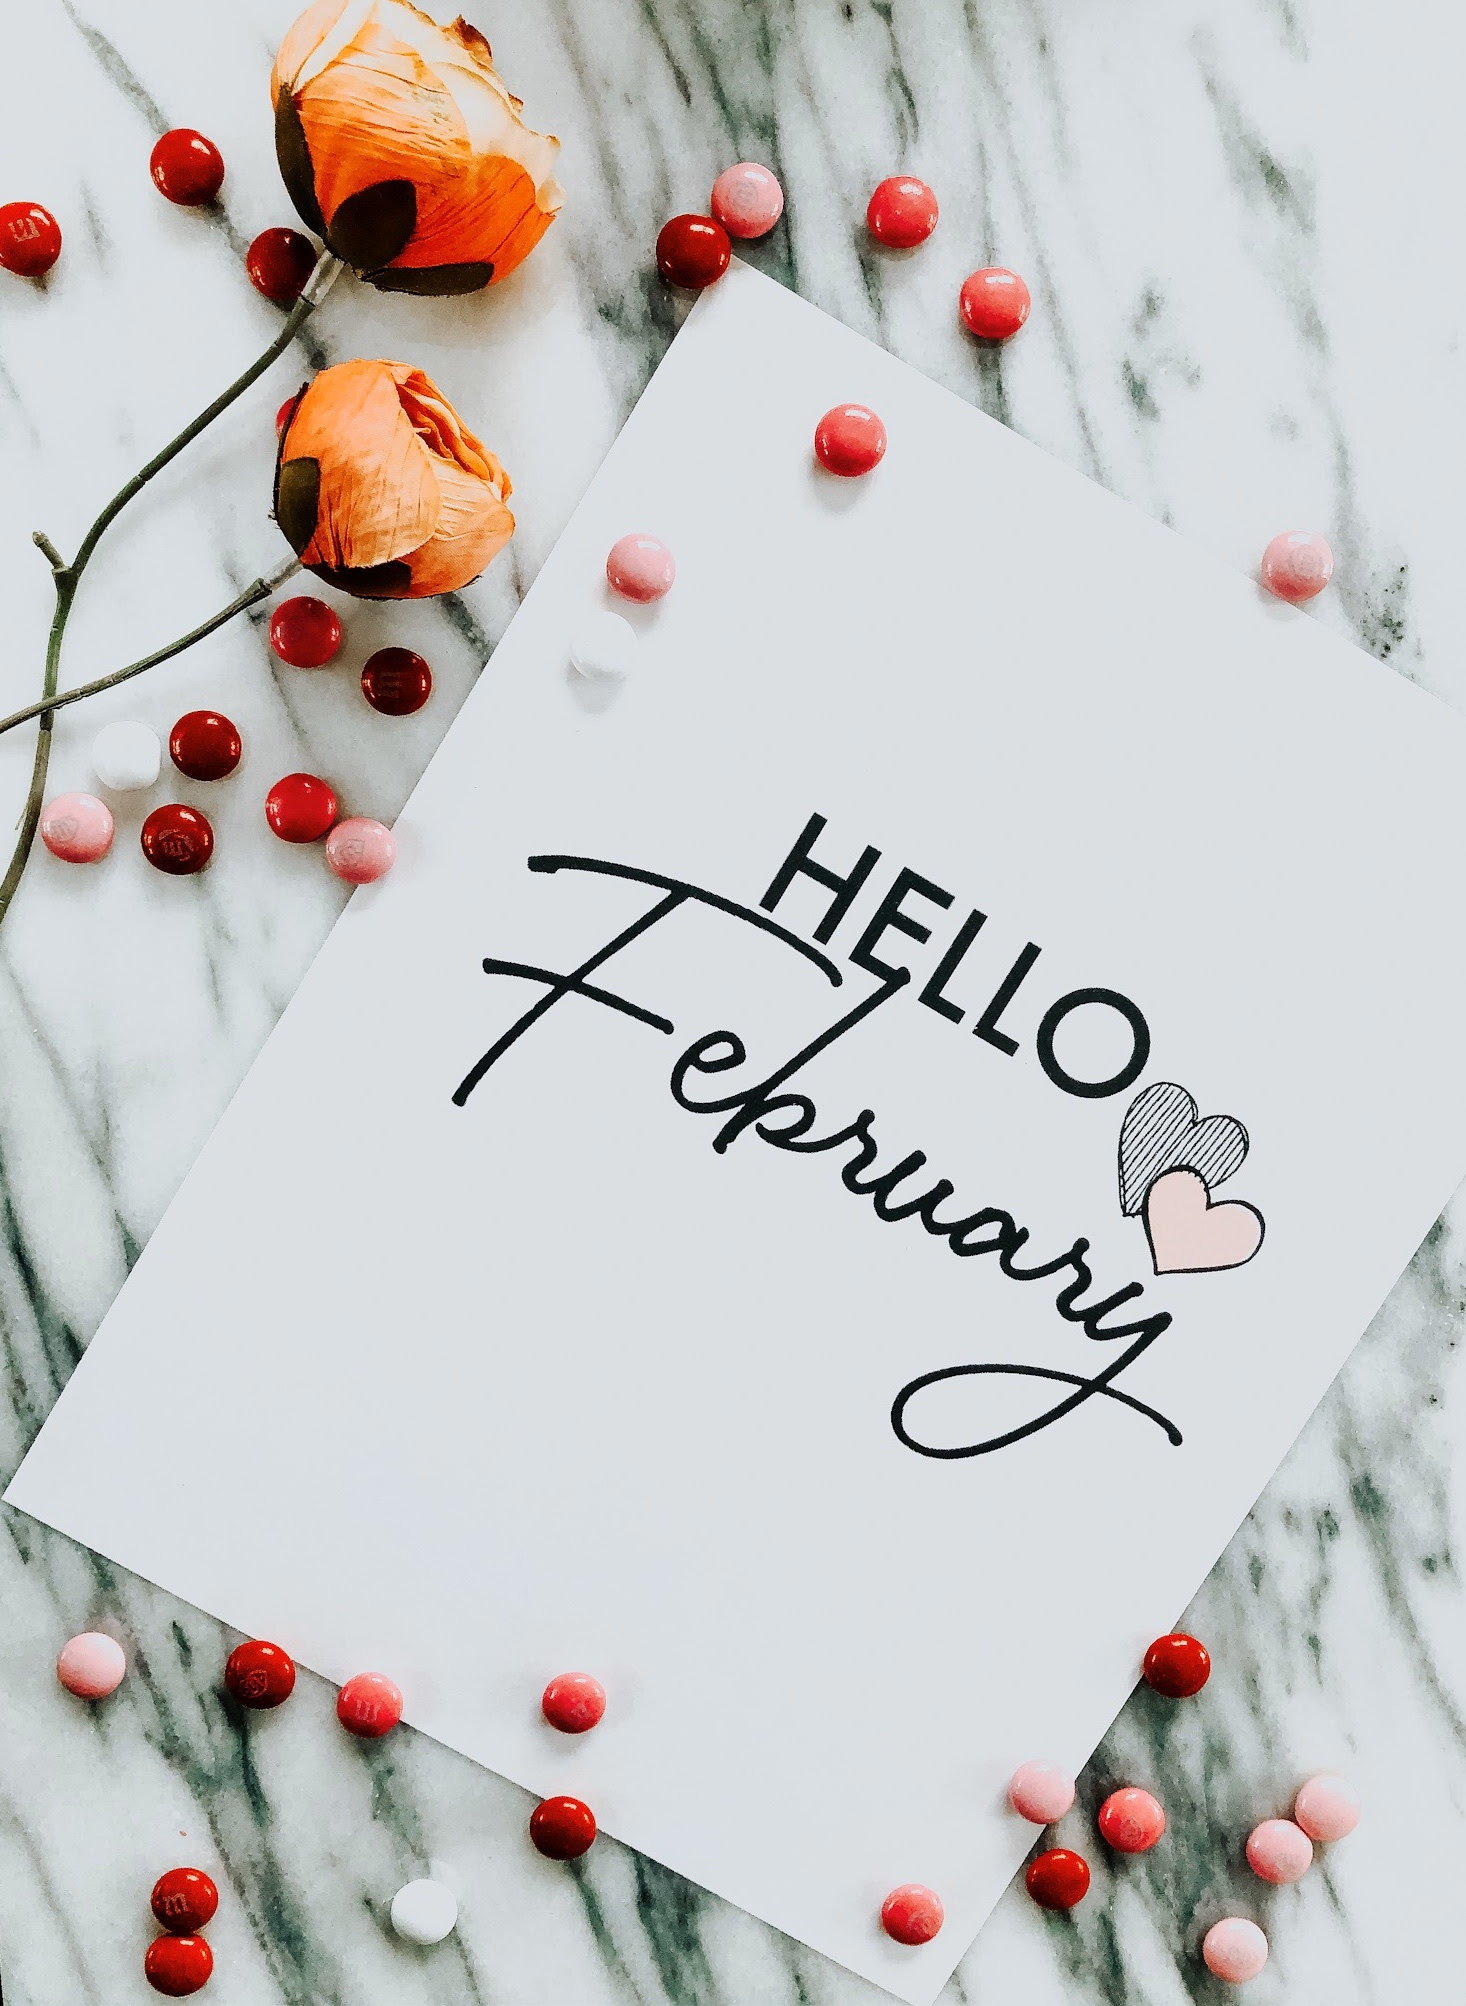 Sweet And Simple Hello February Printable Art With Candies And Flowers